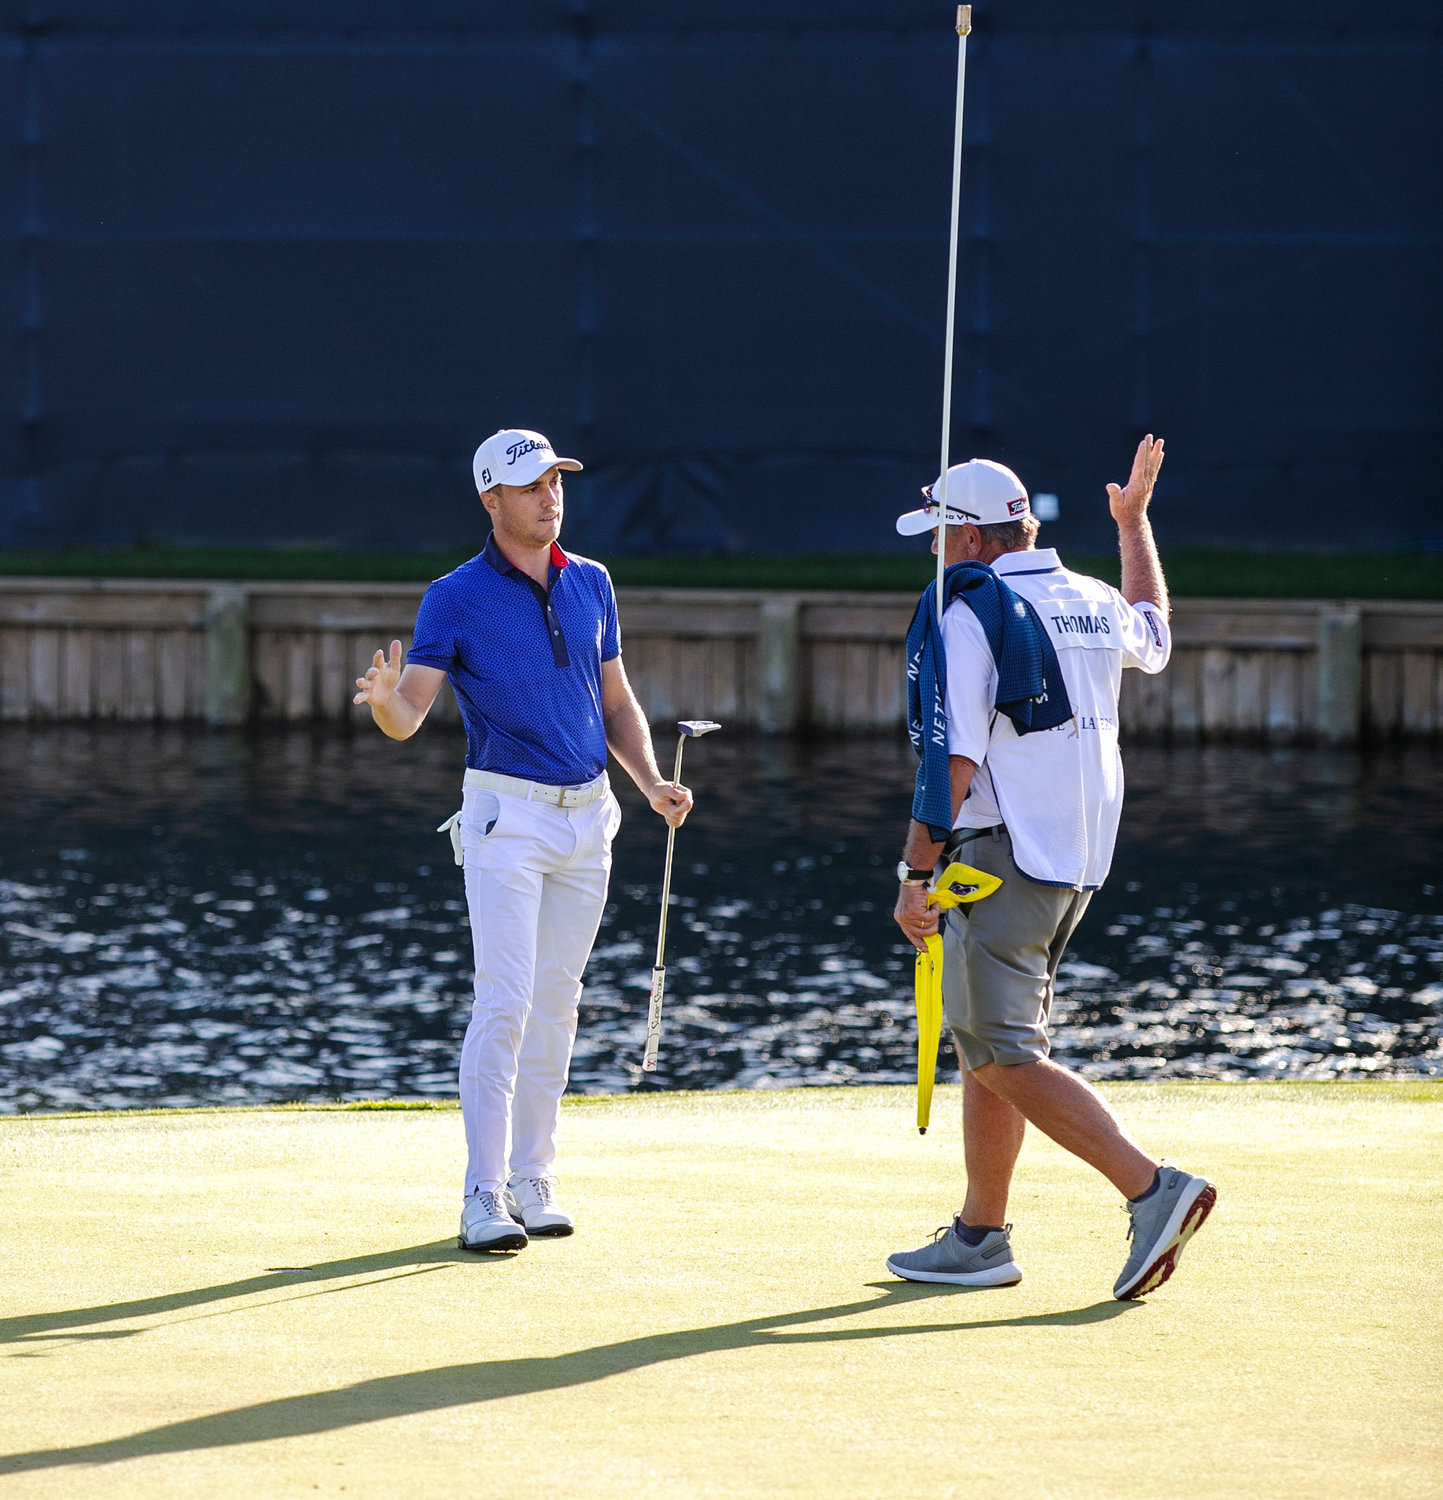 Justin Thomas celebrates with his caddie after winning THE PLAYERS Championship on Sunday, March 14 at THE PLAYERS Stadium Course at TPC Sawgrass.